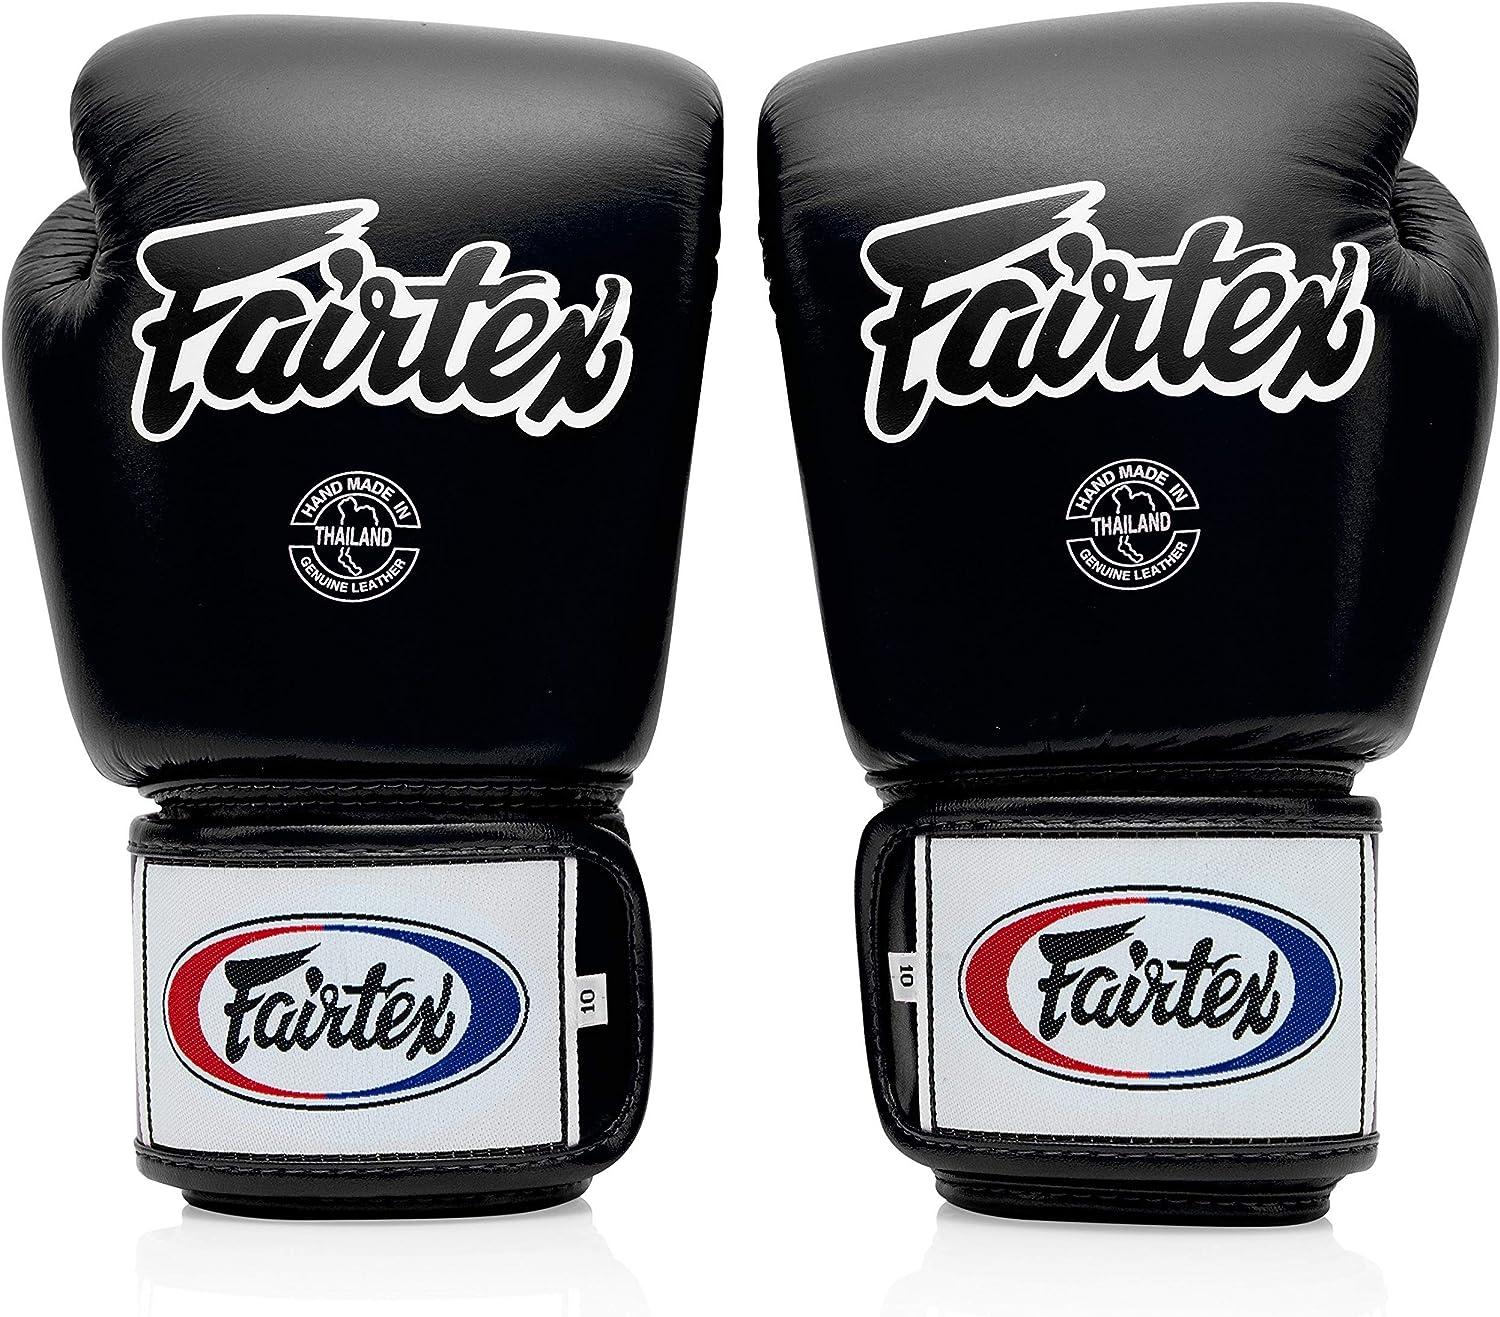 Lace N Loop Pair of Boxing Gloves Straps Lace Up (White Logo) :  : Sports & Outdoors